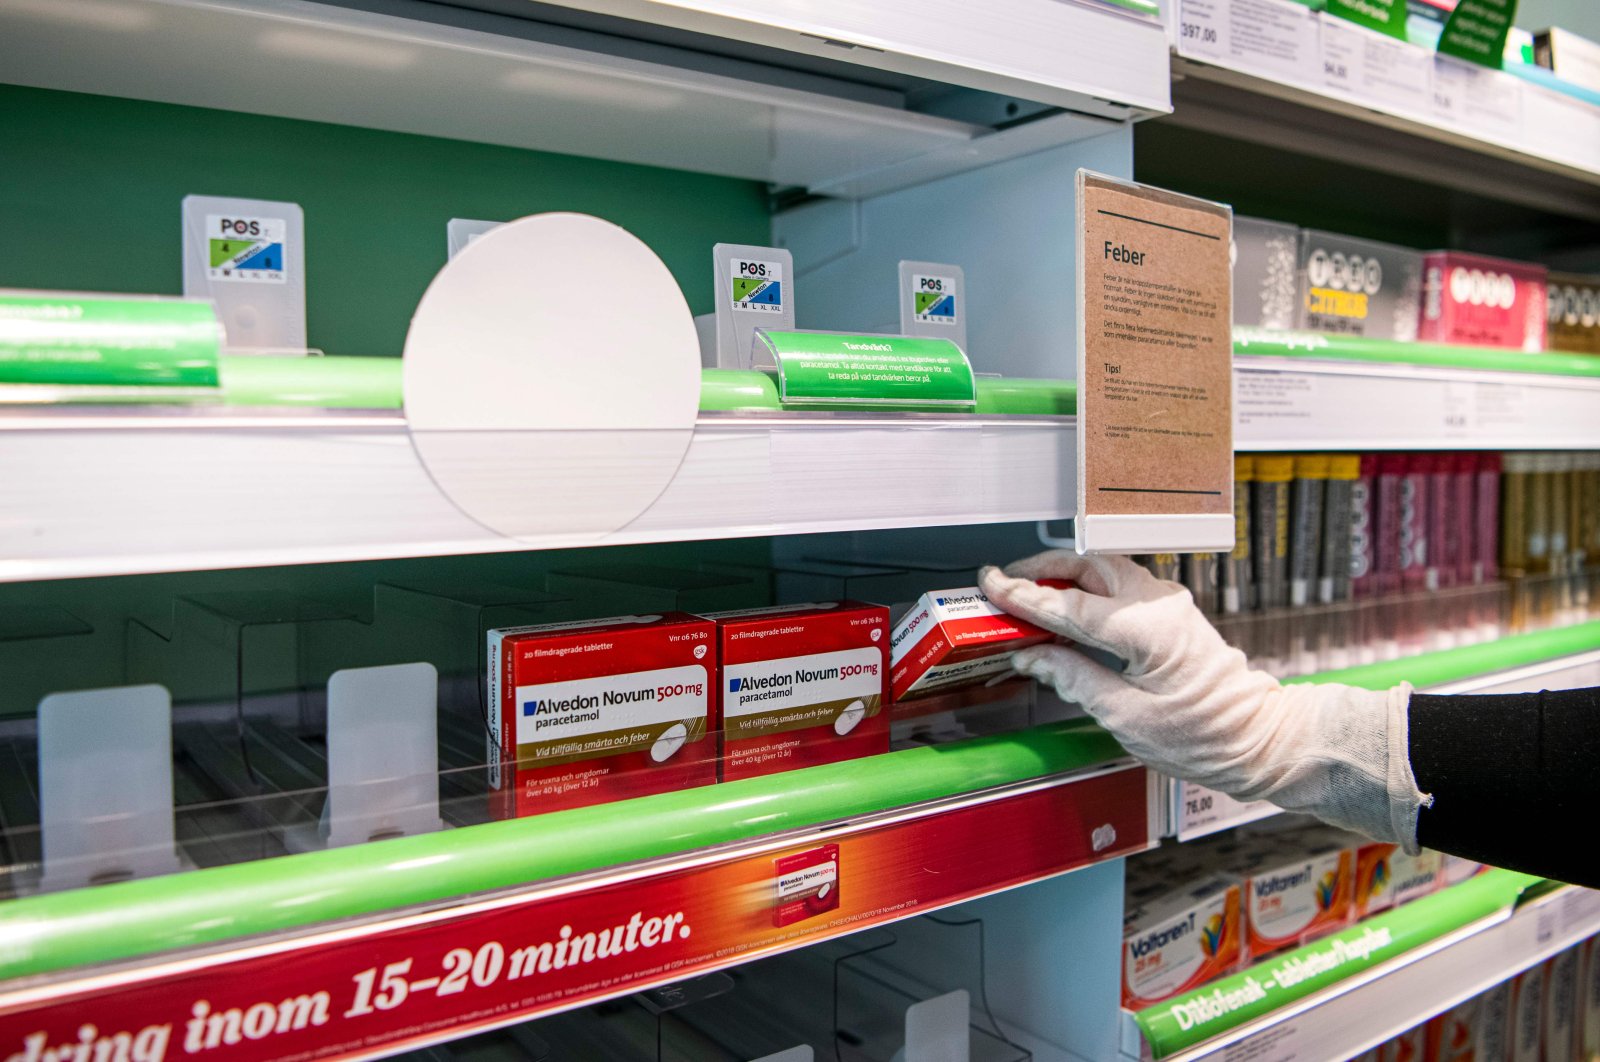 A pharmacy worker stocks boxes of Paracetamol amid the outbreak of COVID-19, Sundbyberg, Monday, March 16, 2020. (AFP Photo)